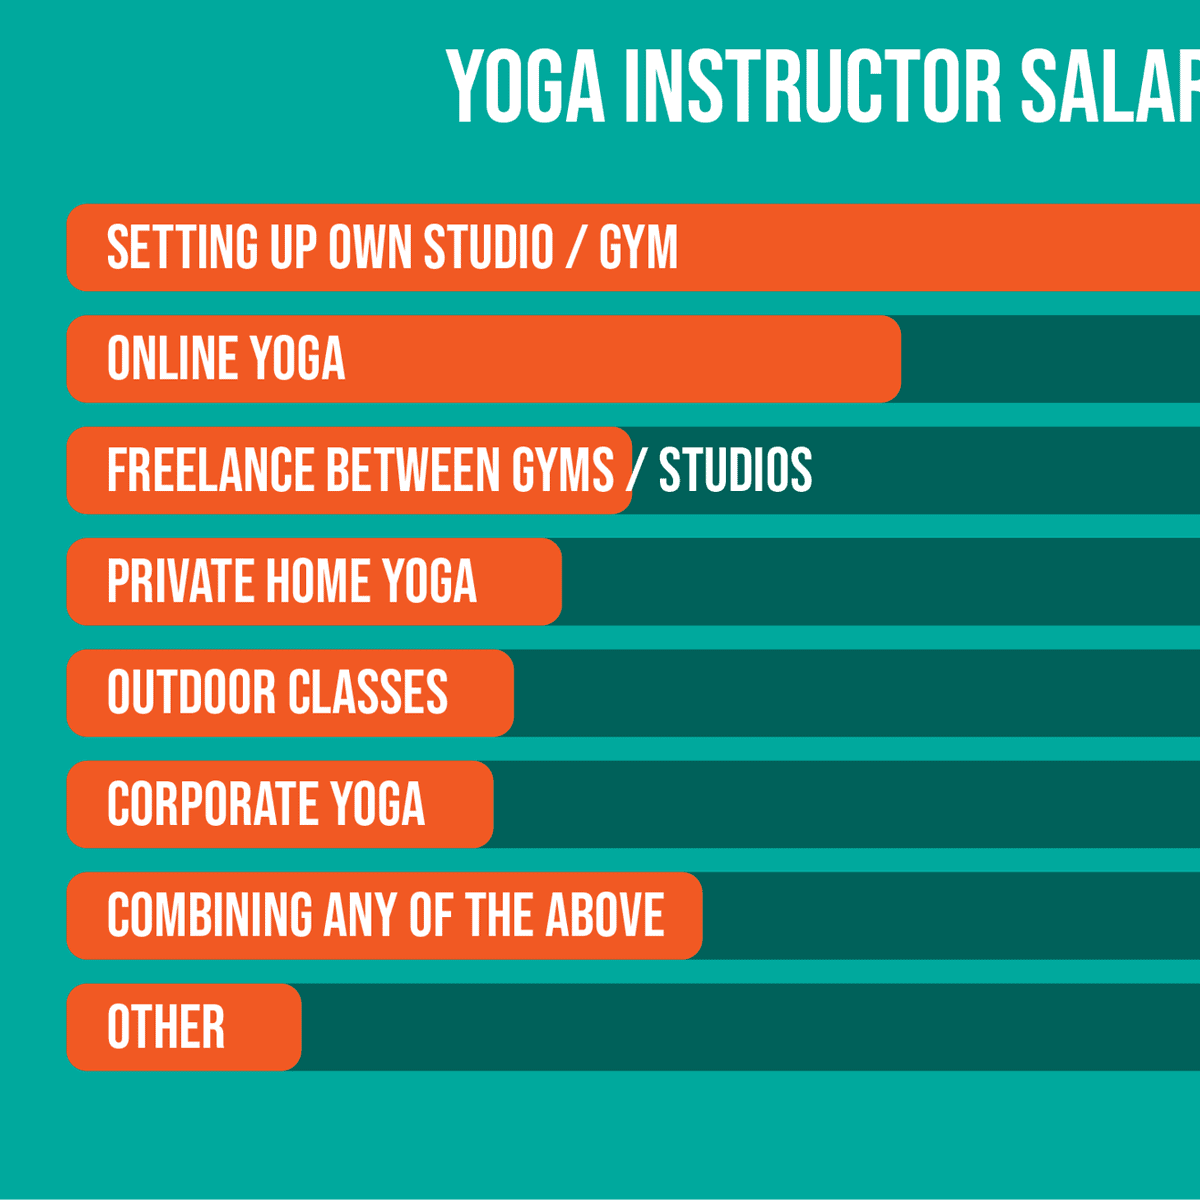 How Much Does it Cost to Become a Yoga Instructor